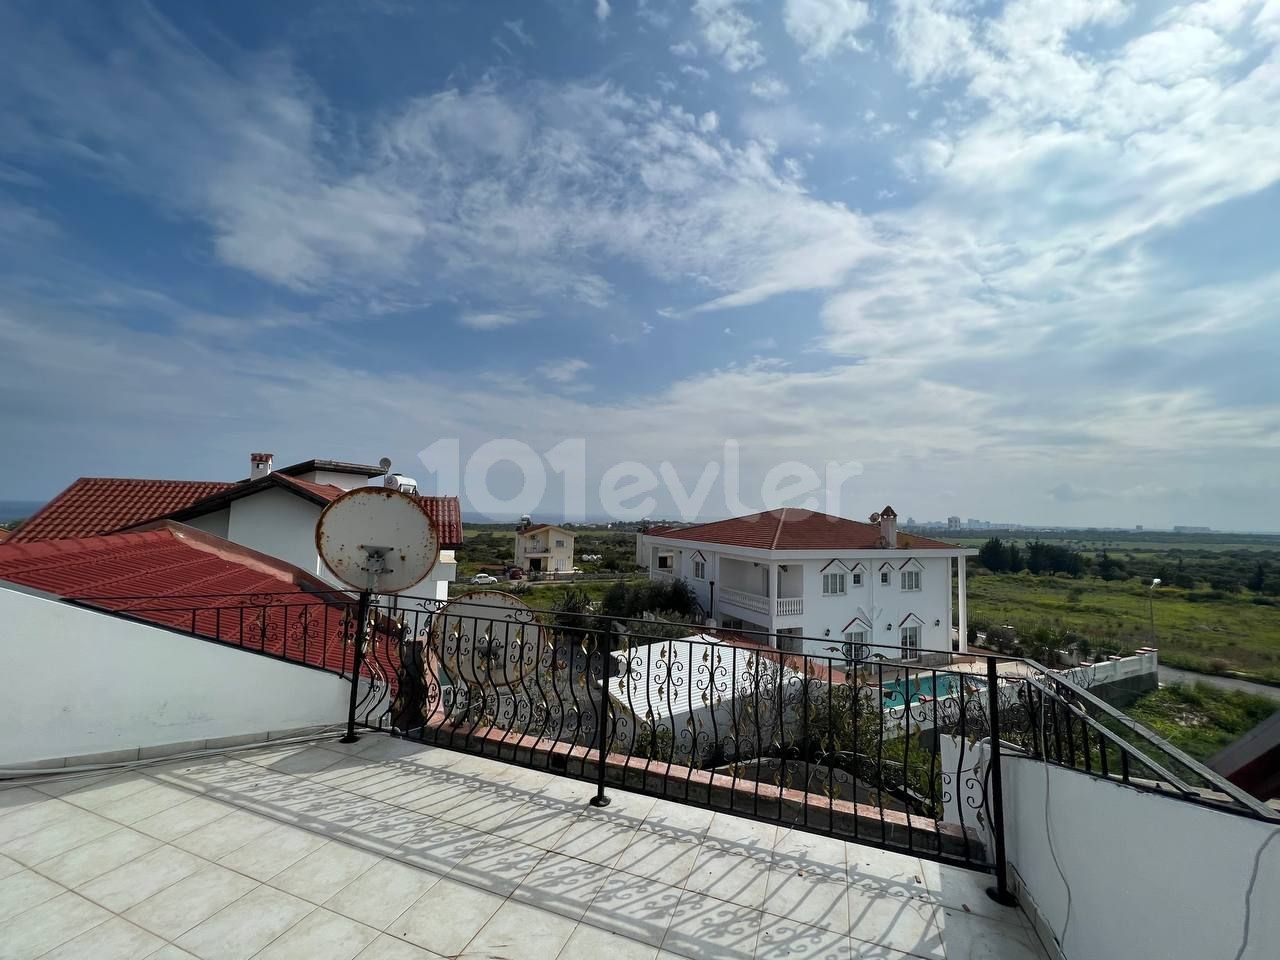 4 bedrooms duplex villa, wonderful view of the sea, garden and nature in quiet and cozy environment.